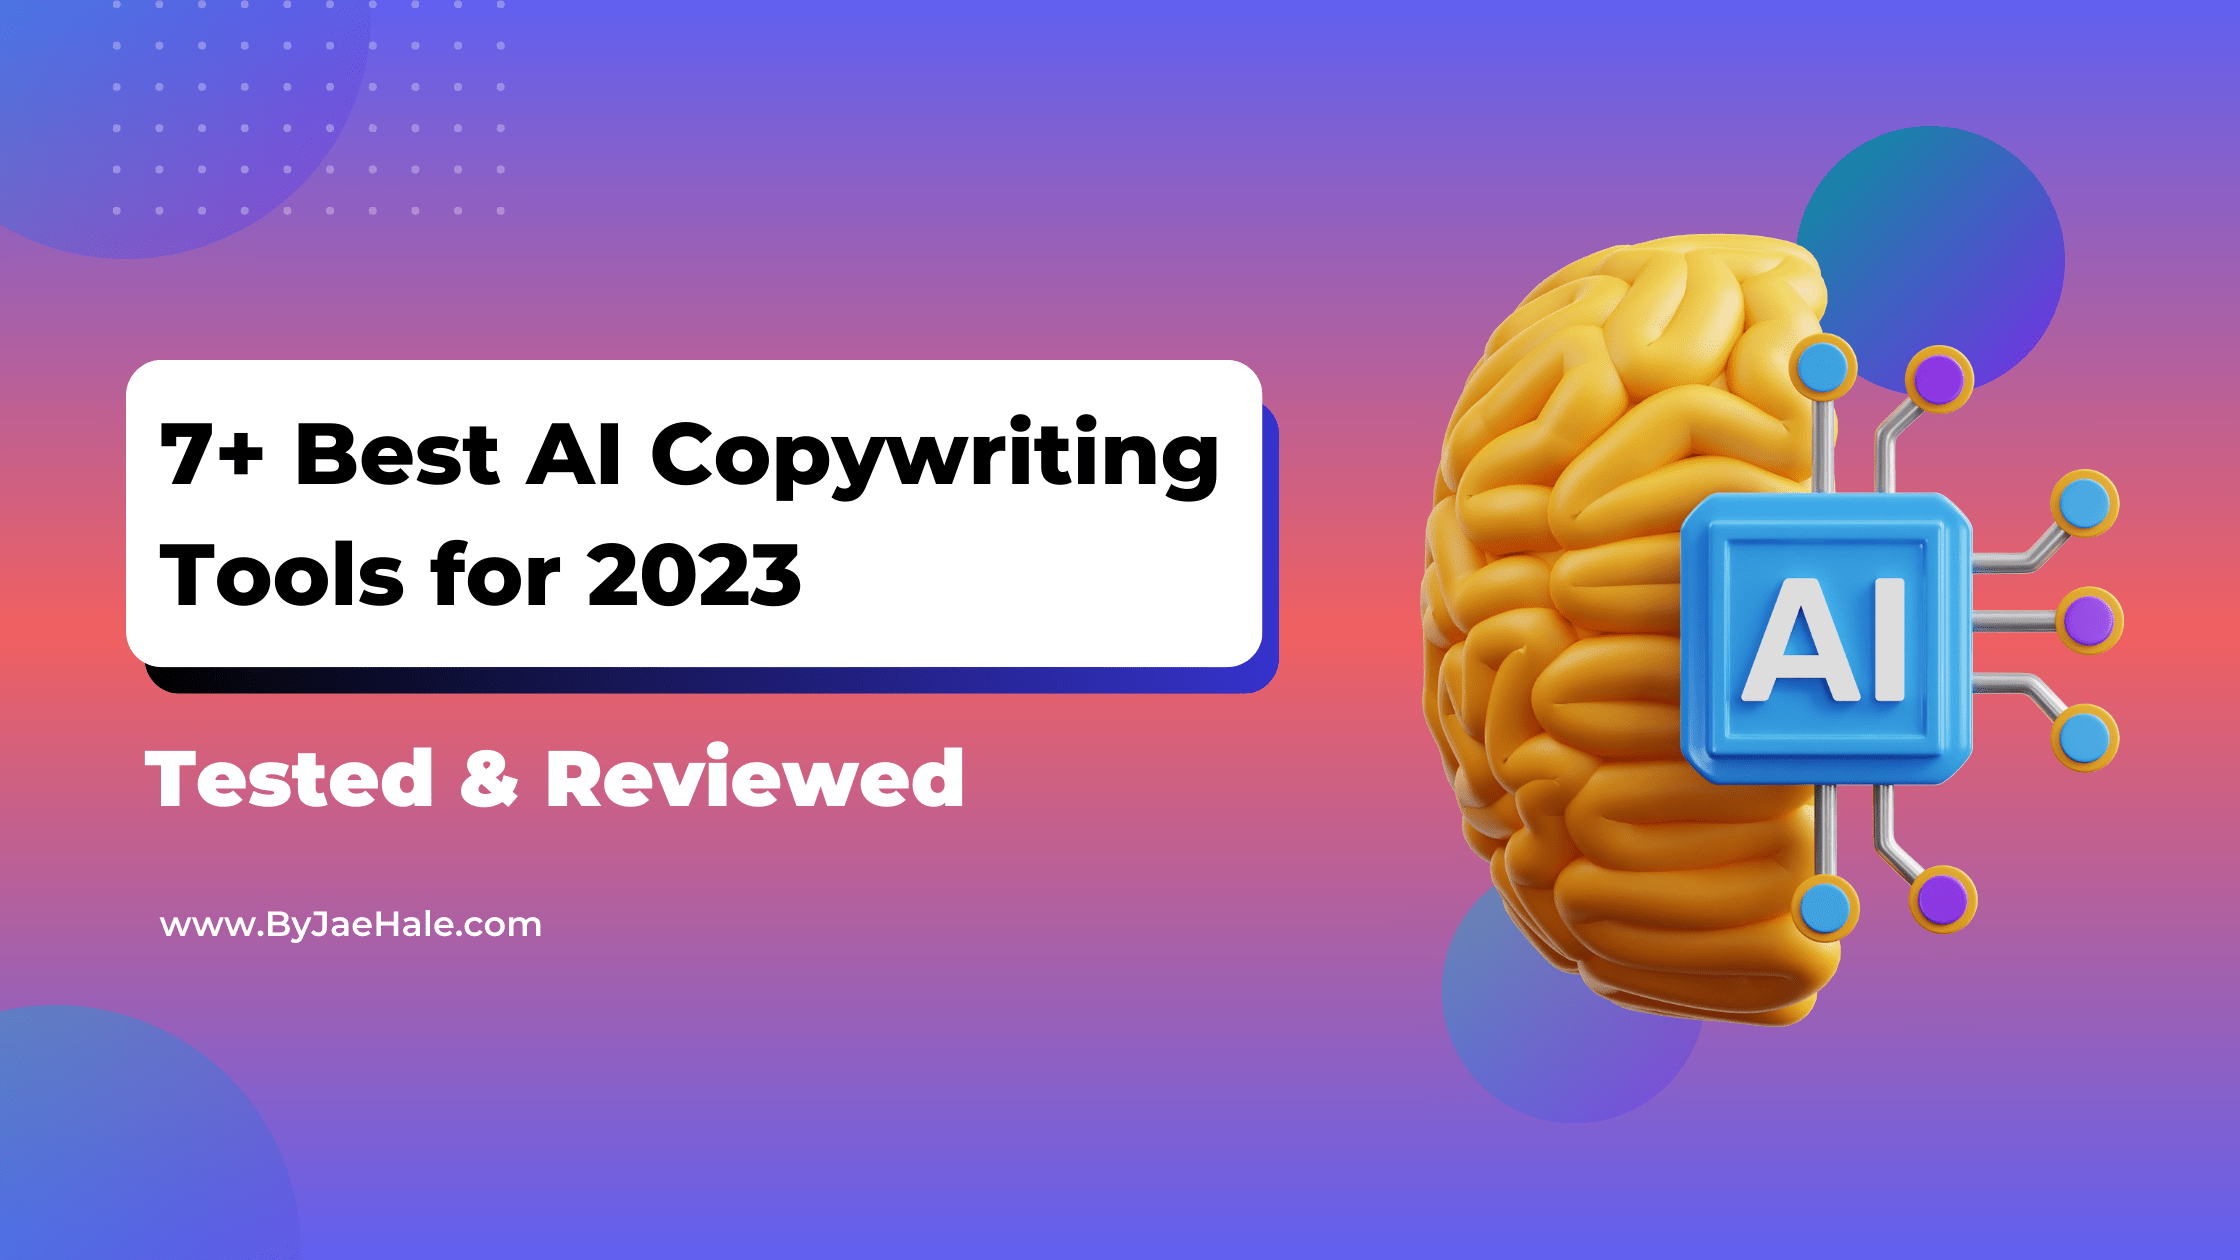 The best ai copywriting tools for 2023